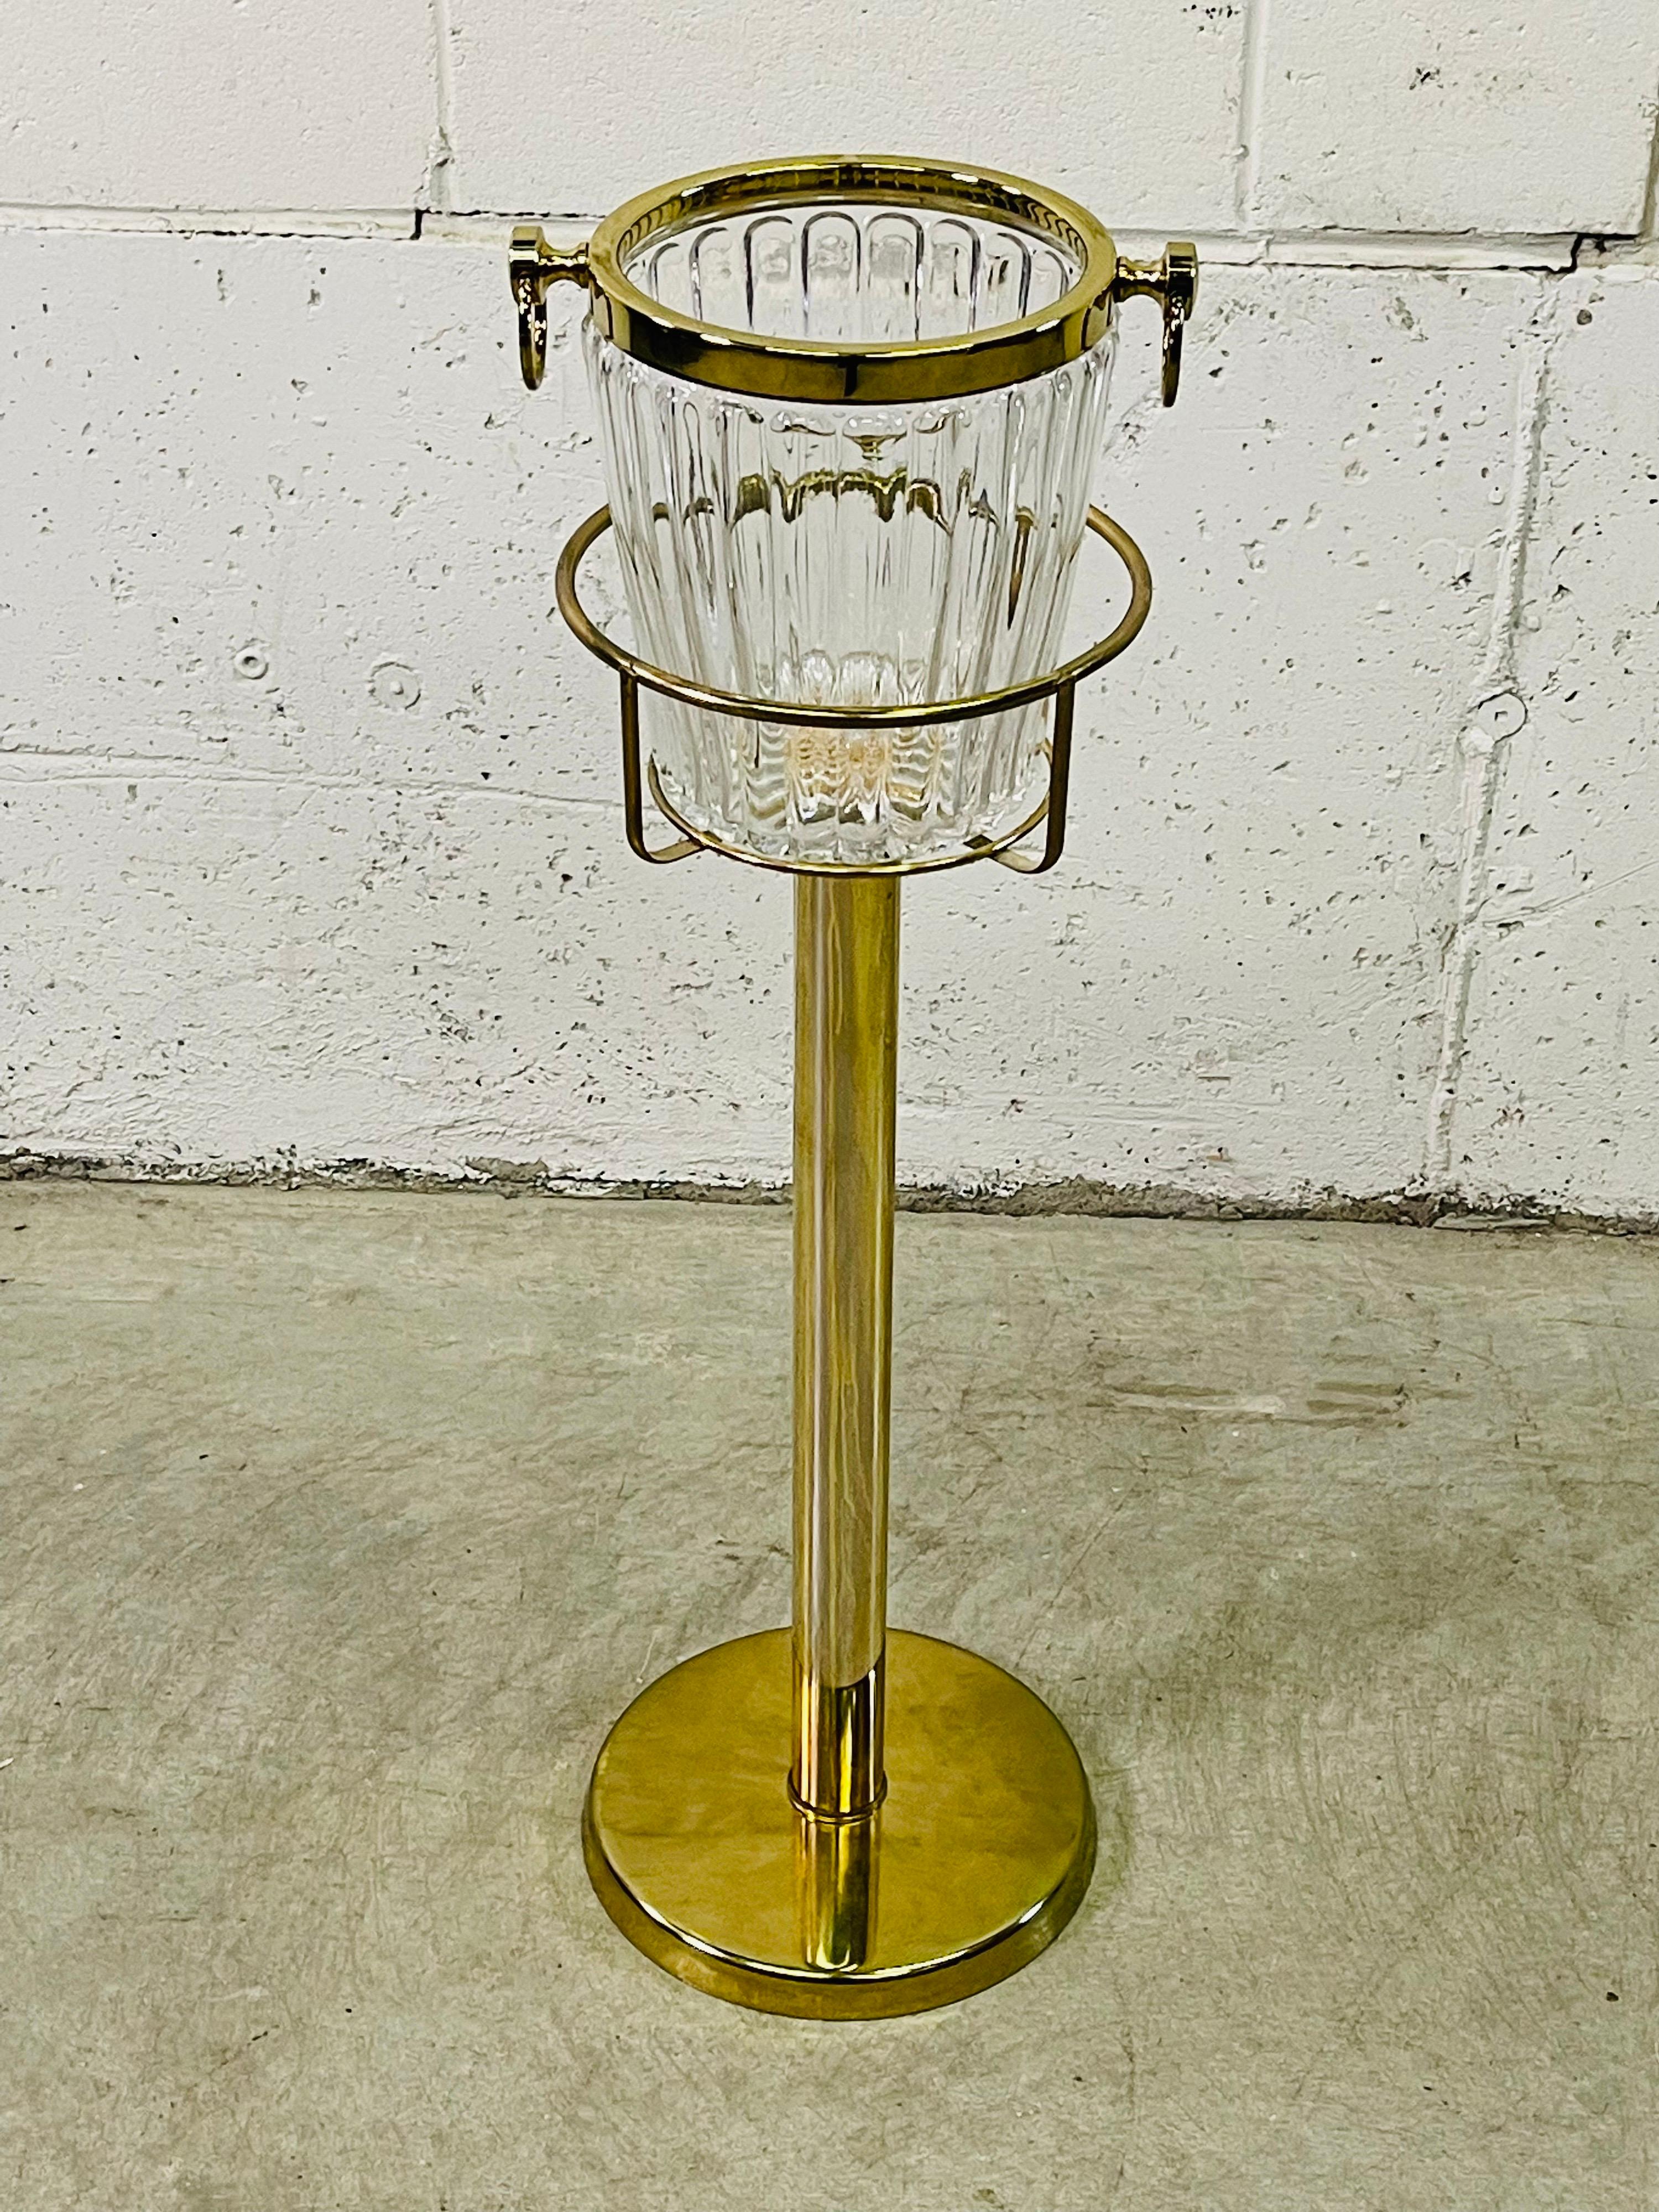 Vintage 1970s champagne glass ice bucket with brass stand. The ice bucket has a brass rim and handles. The stand has a heavy base and sturdy. No marks. Ice bucket measures: 7.5” diameter x 8.5” height.